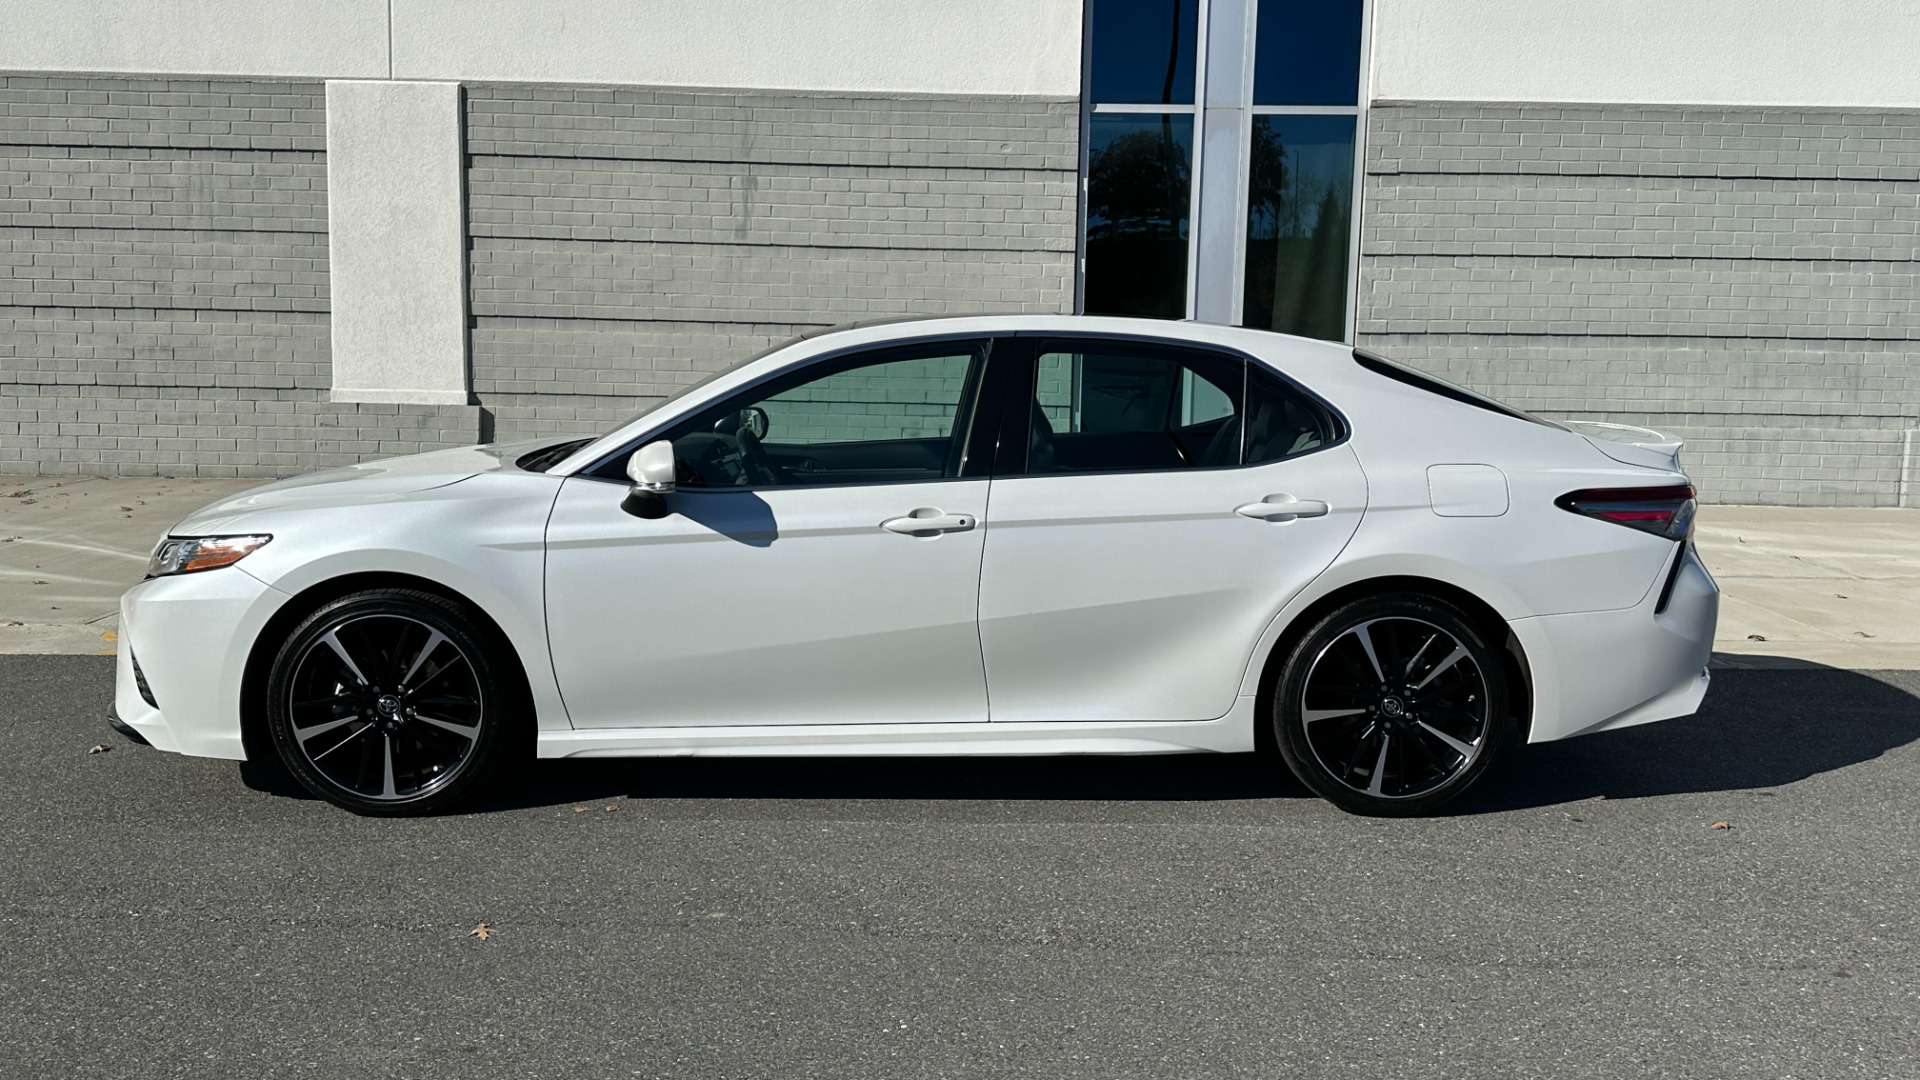 Used 2018 Toyota Camry XSE / PANORAMIC ROOF / ENTUNE / HEATED SEATS / BACKUP CAMERA for sale $23,999 at Formula Imports in Charlotte NC 28227 3